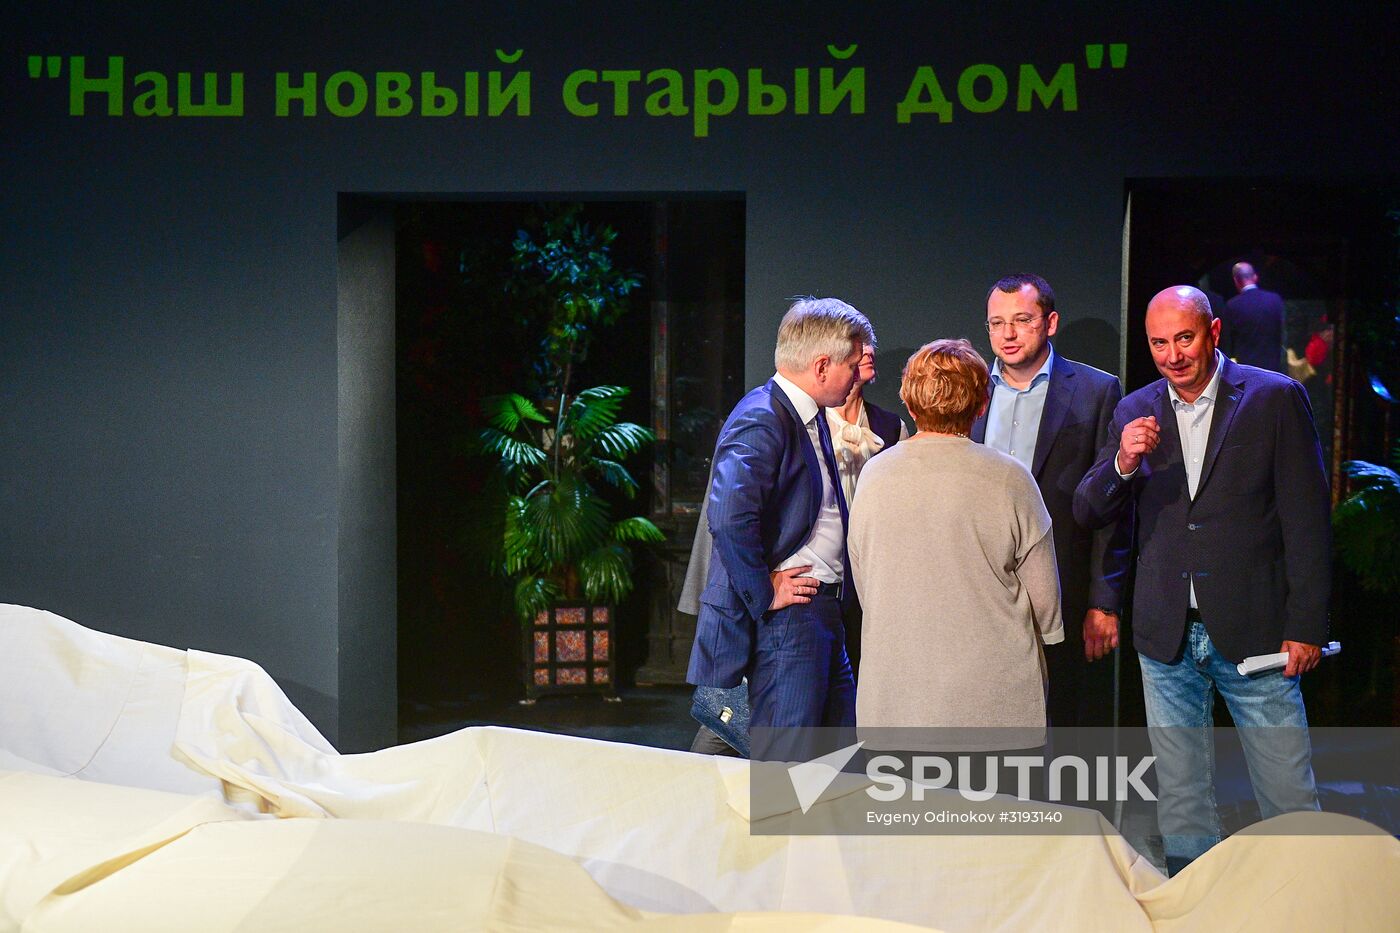 Theater on Pokrovka opens after major repairs